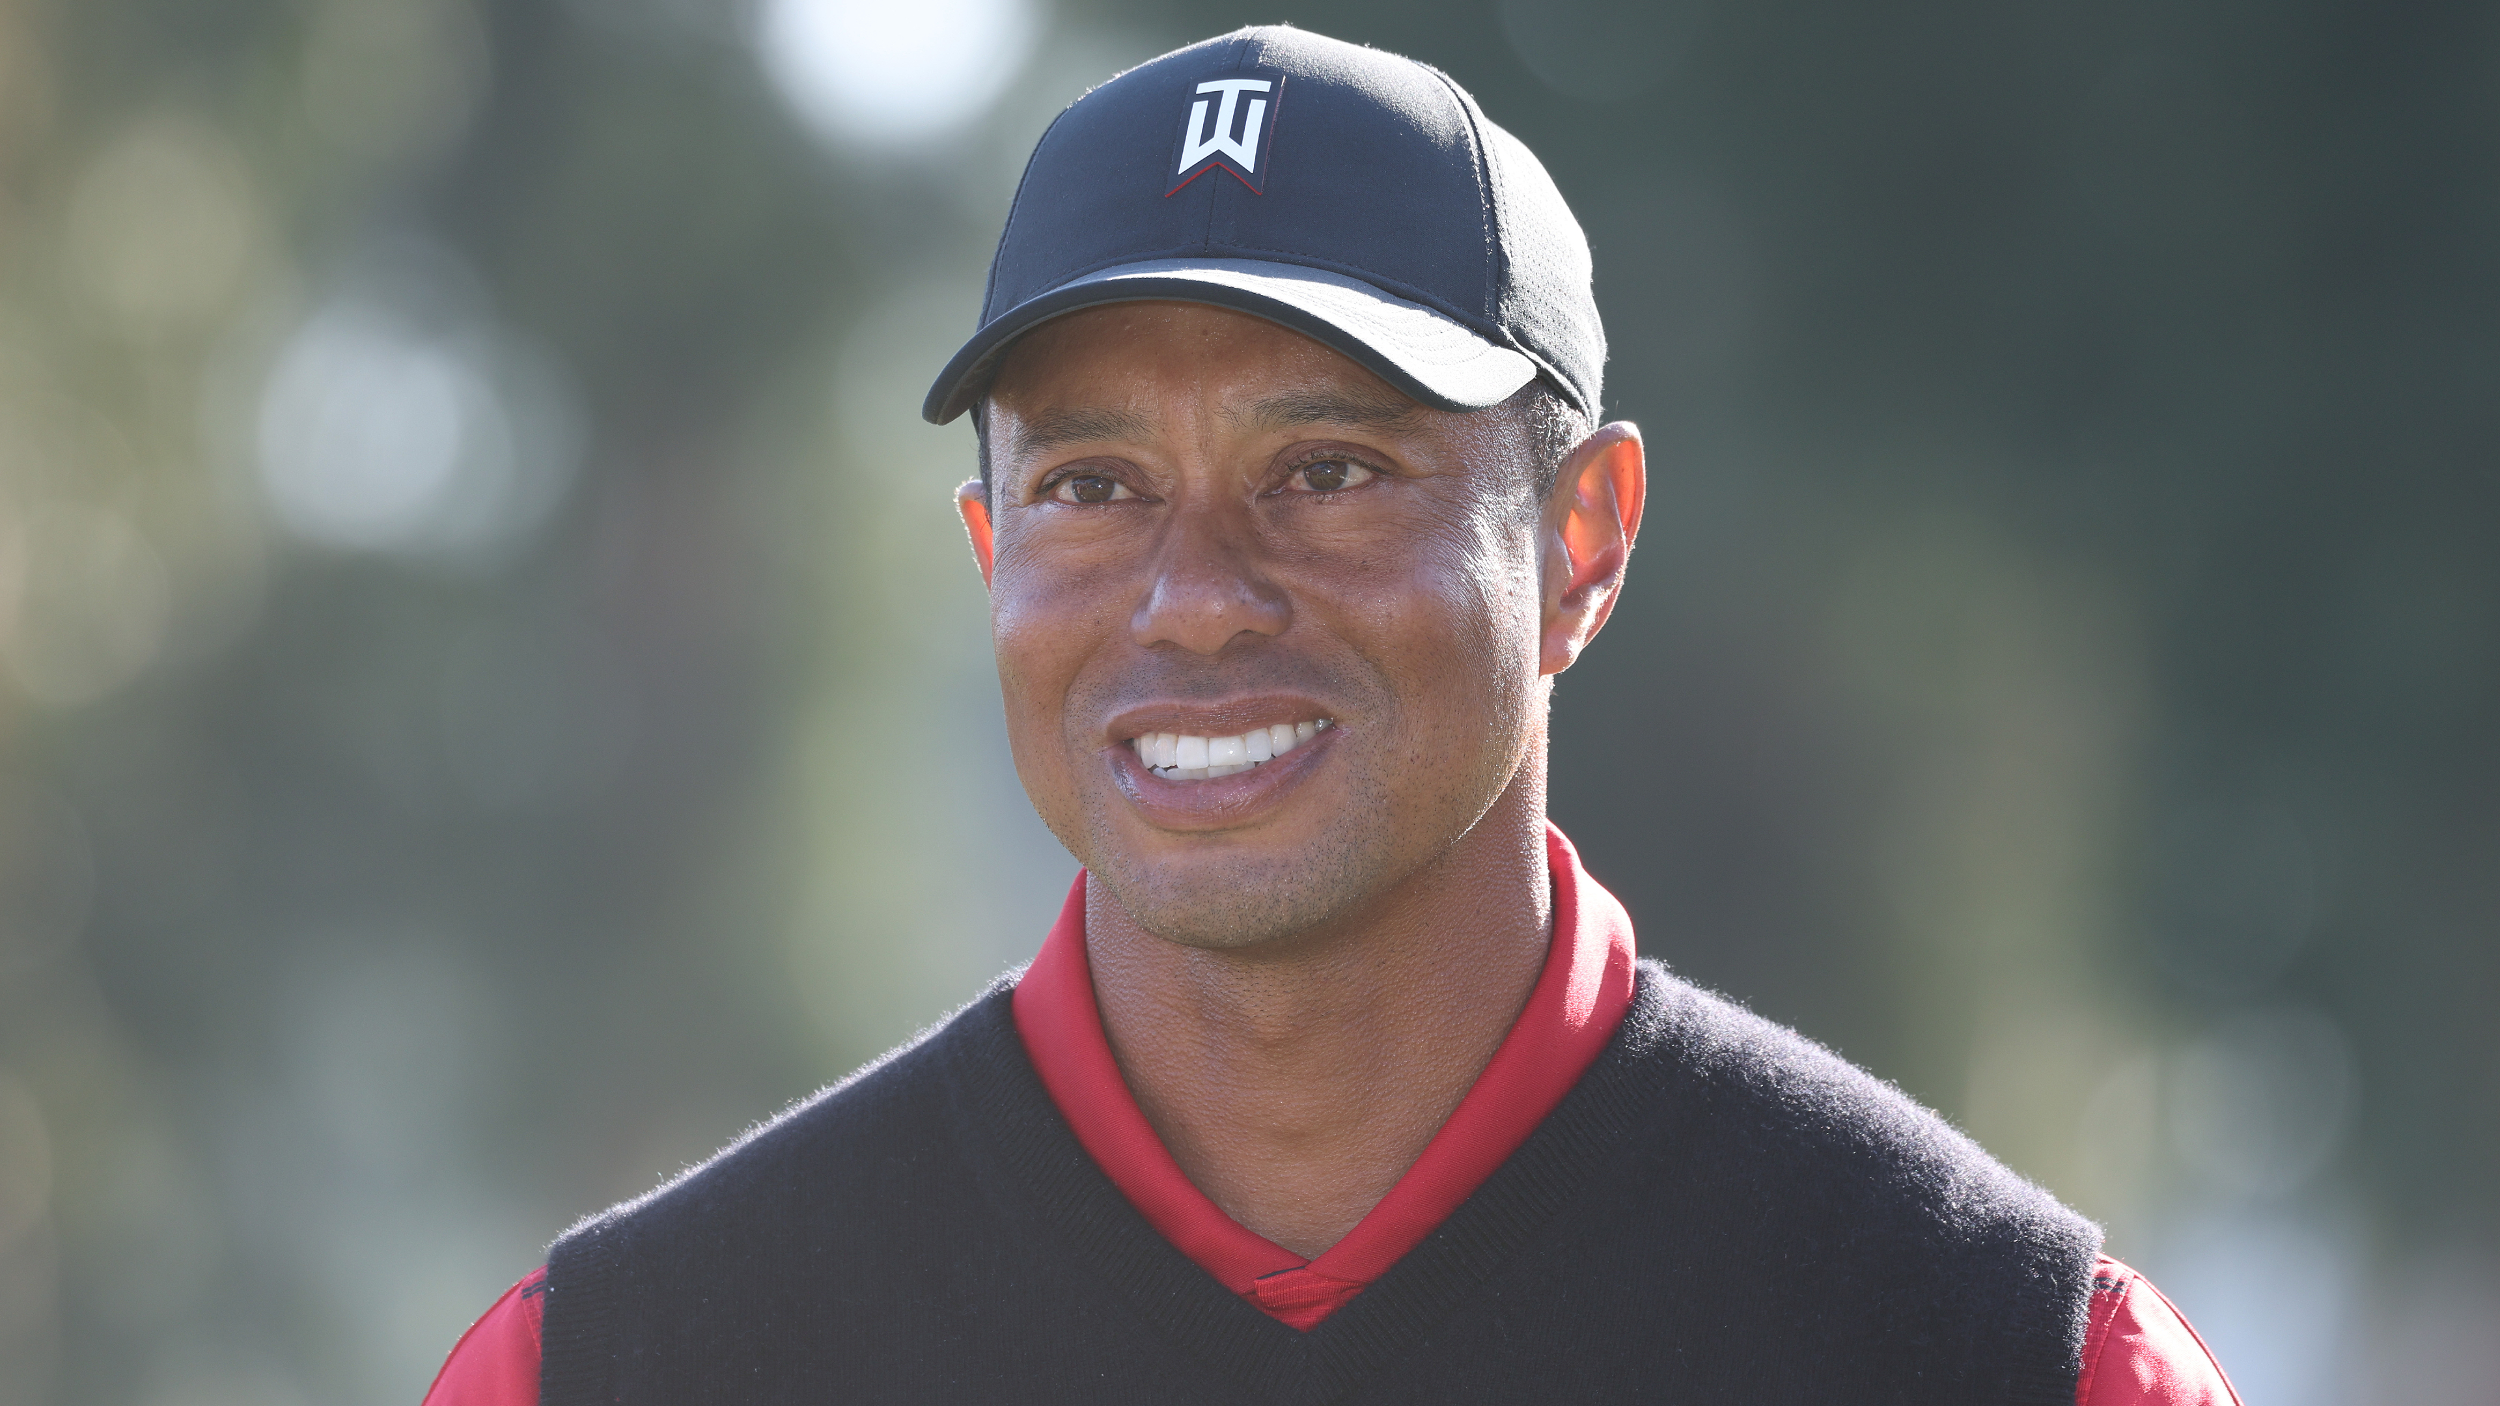 Tiger Woods and Mike Trout announce plans for New Jersey golf